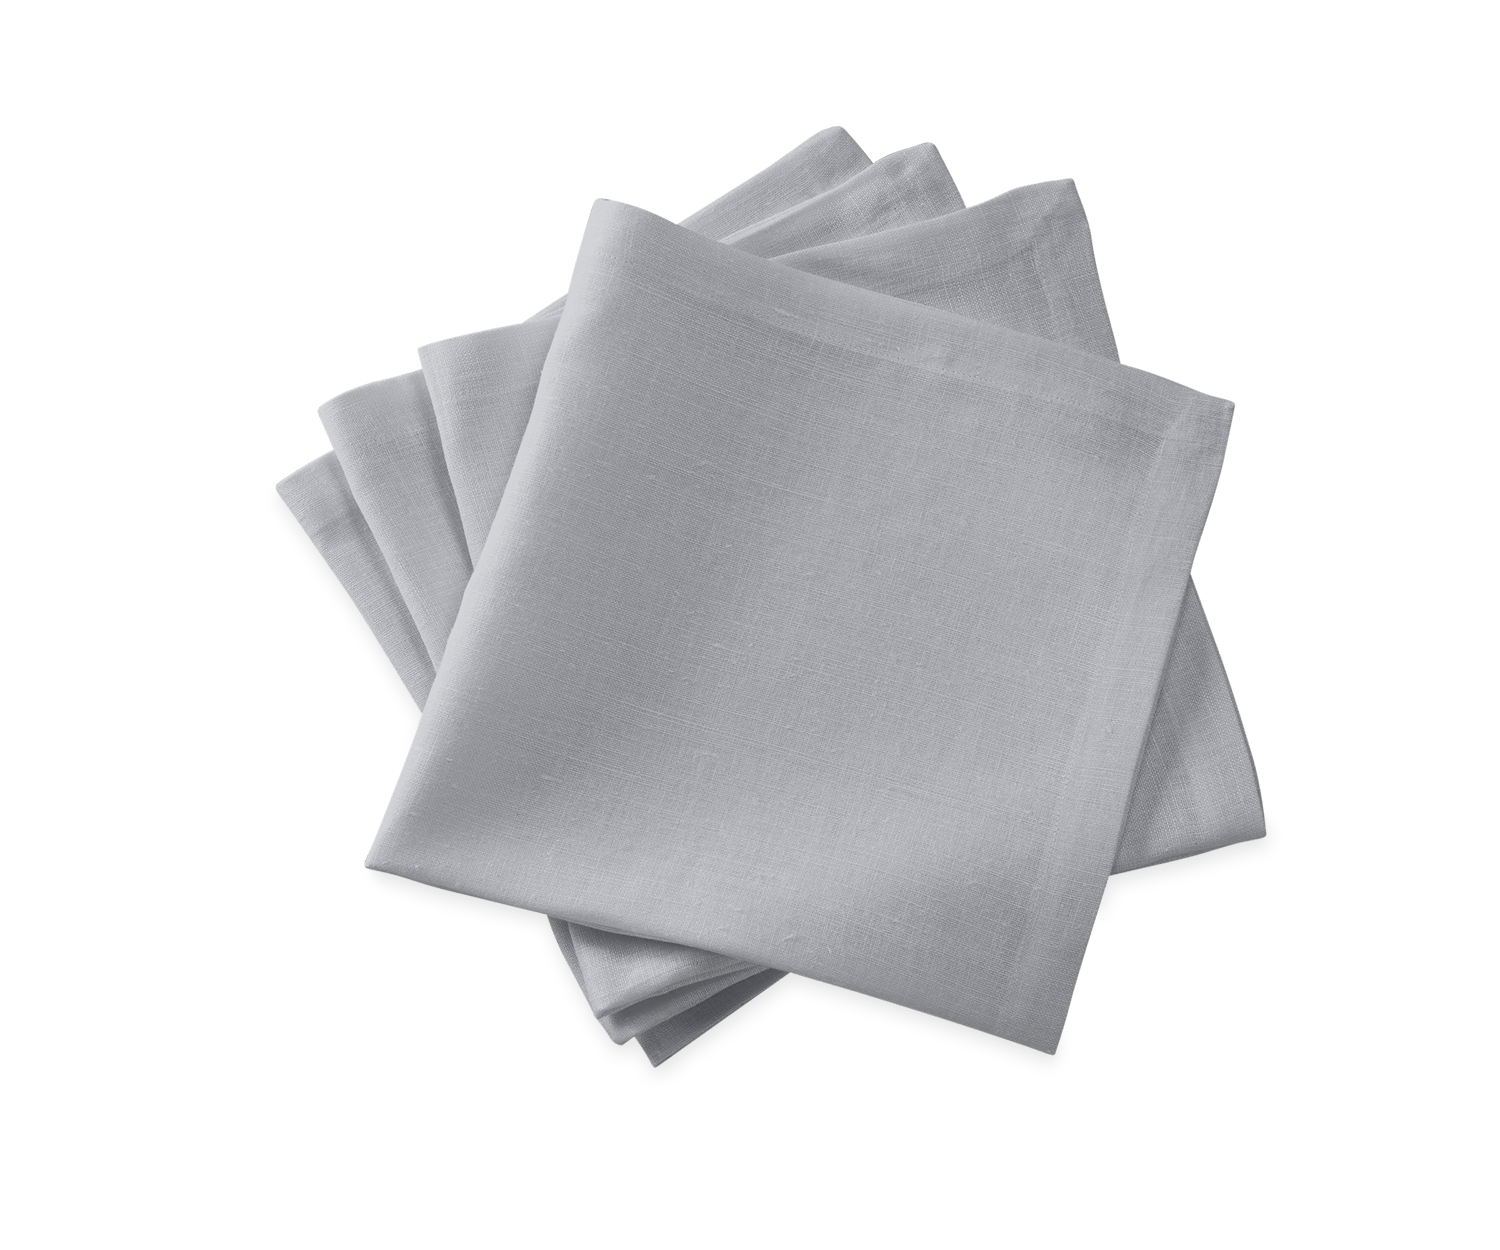 https://matouk-website.imgix.net/spree/products/1641/original/chamant_Napkin_Silver_secondary.png?1522949716